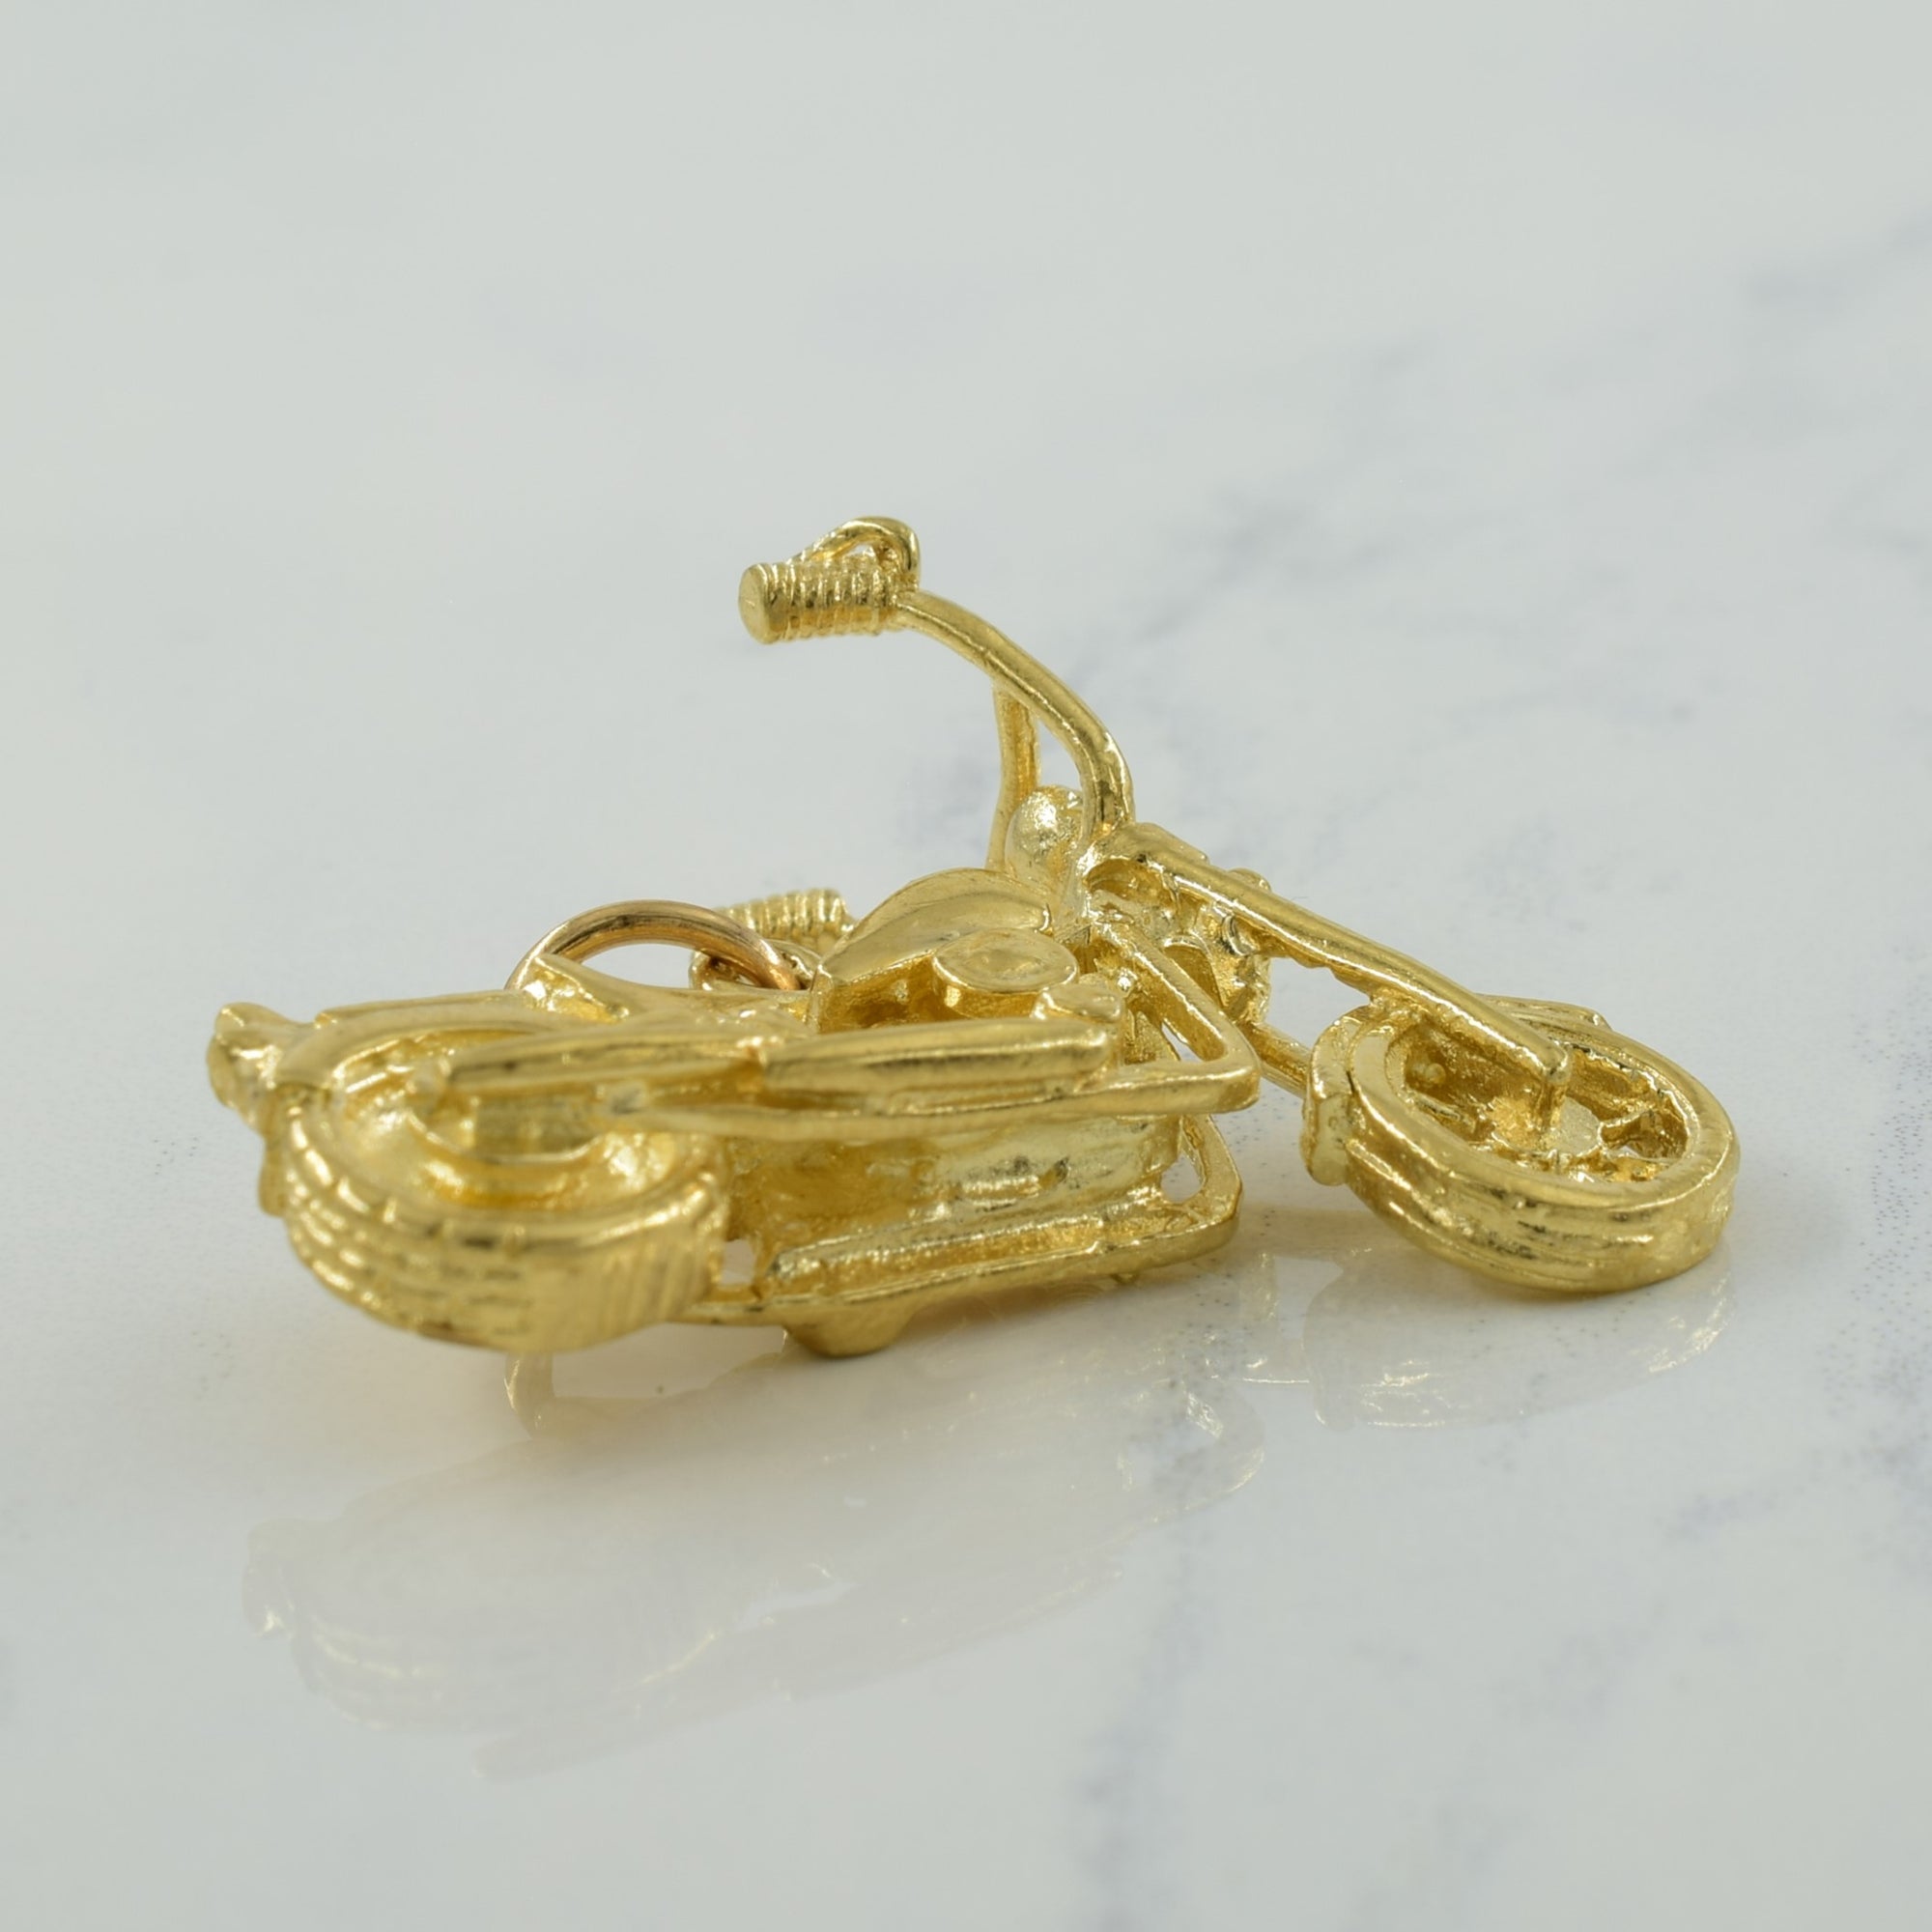 10k Yellow Gold Motorcycle Charm |